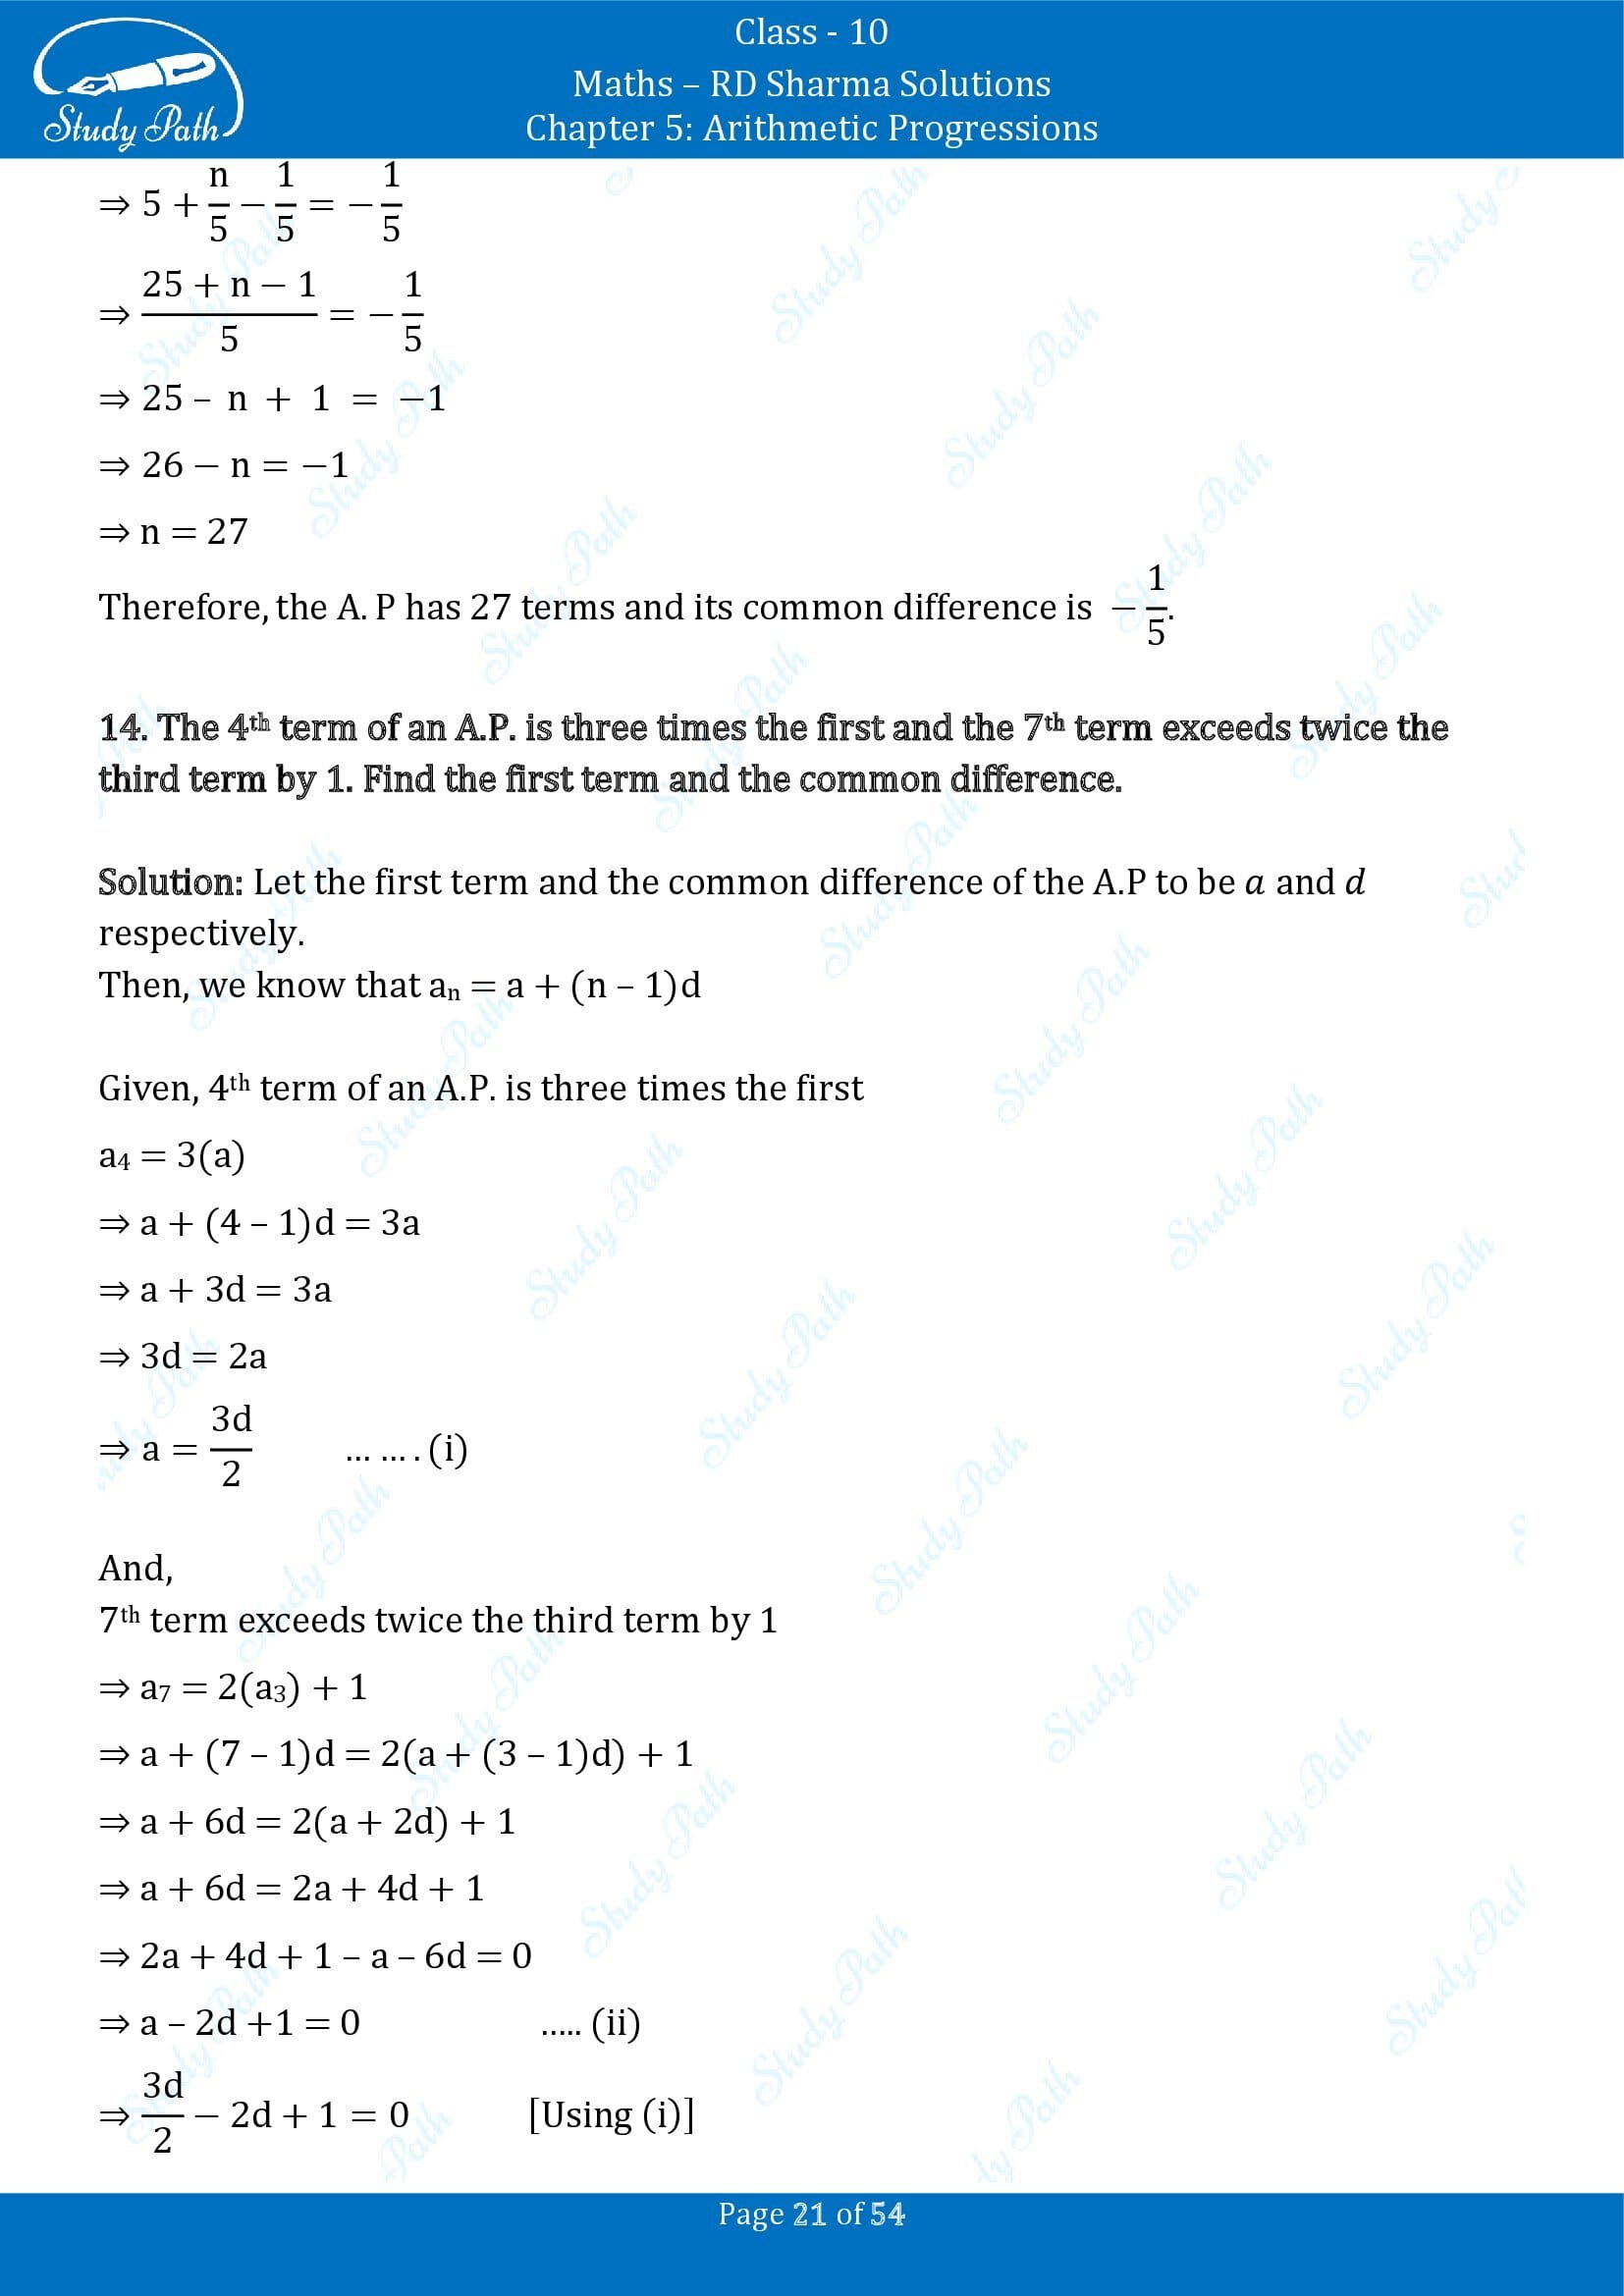 RD Sharma Solutions Class 10 Chapter 5 Arithmetic Progressions Exercise 5.4 00021